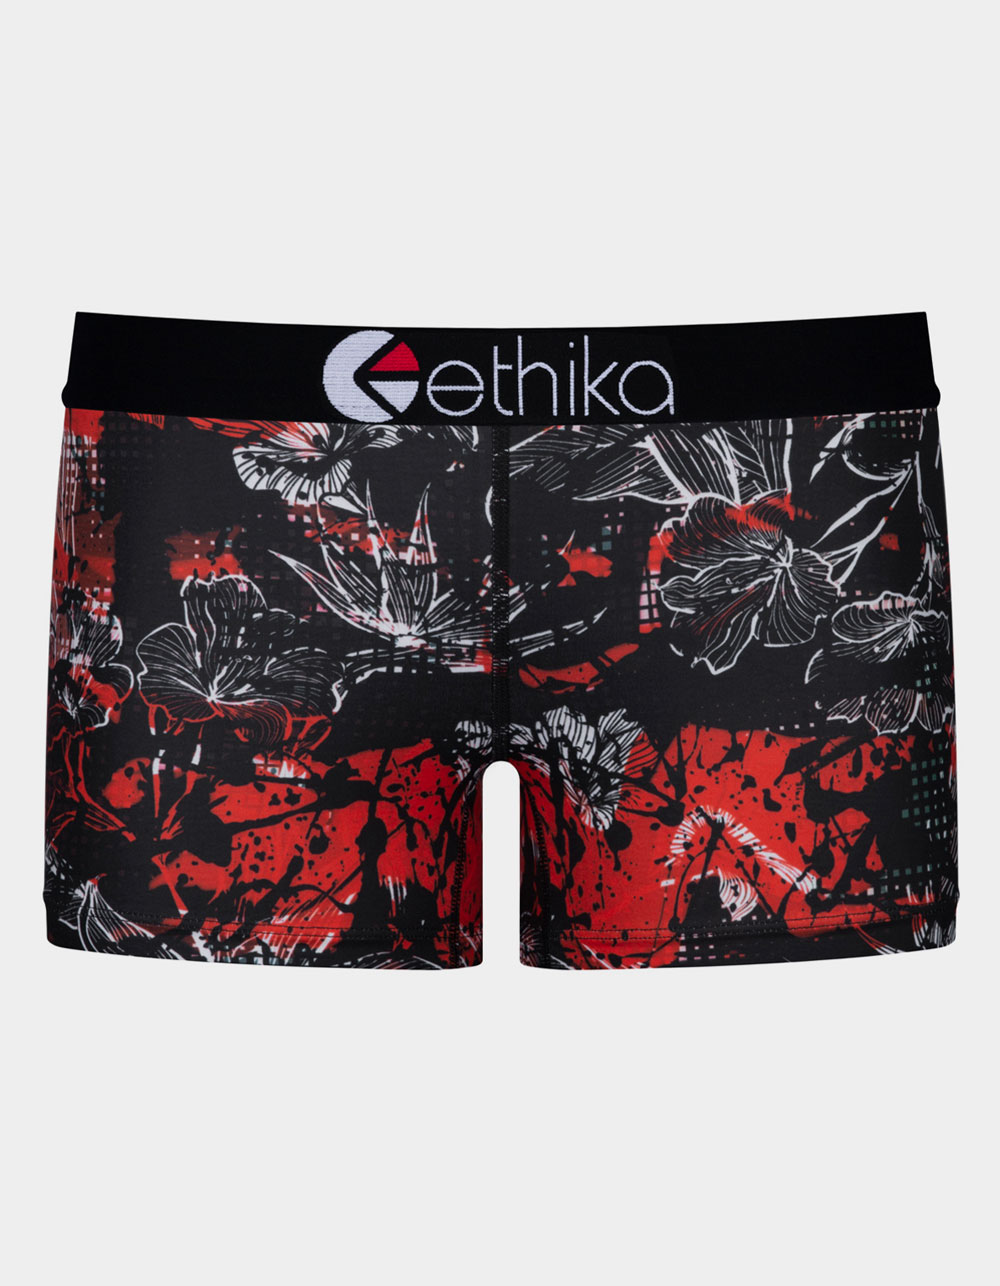 Ethika Soto St Green/Red Women Shorts WLUS1763 – Last Stop